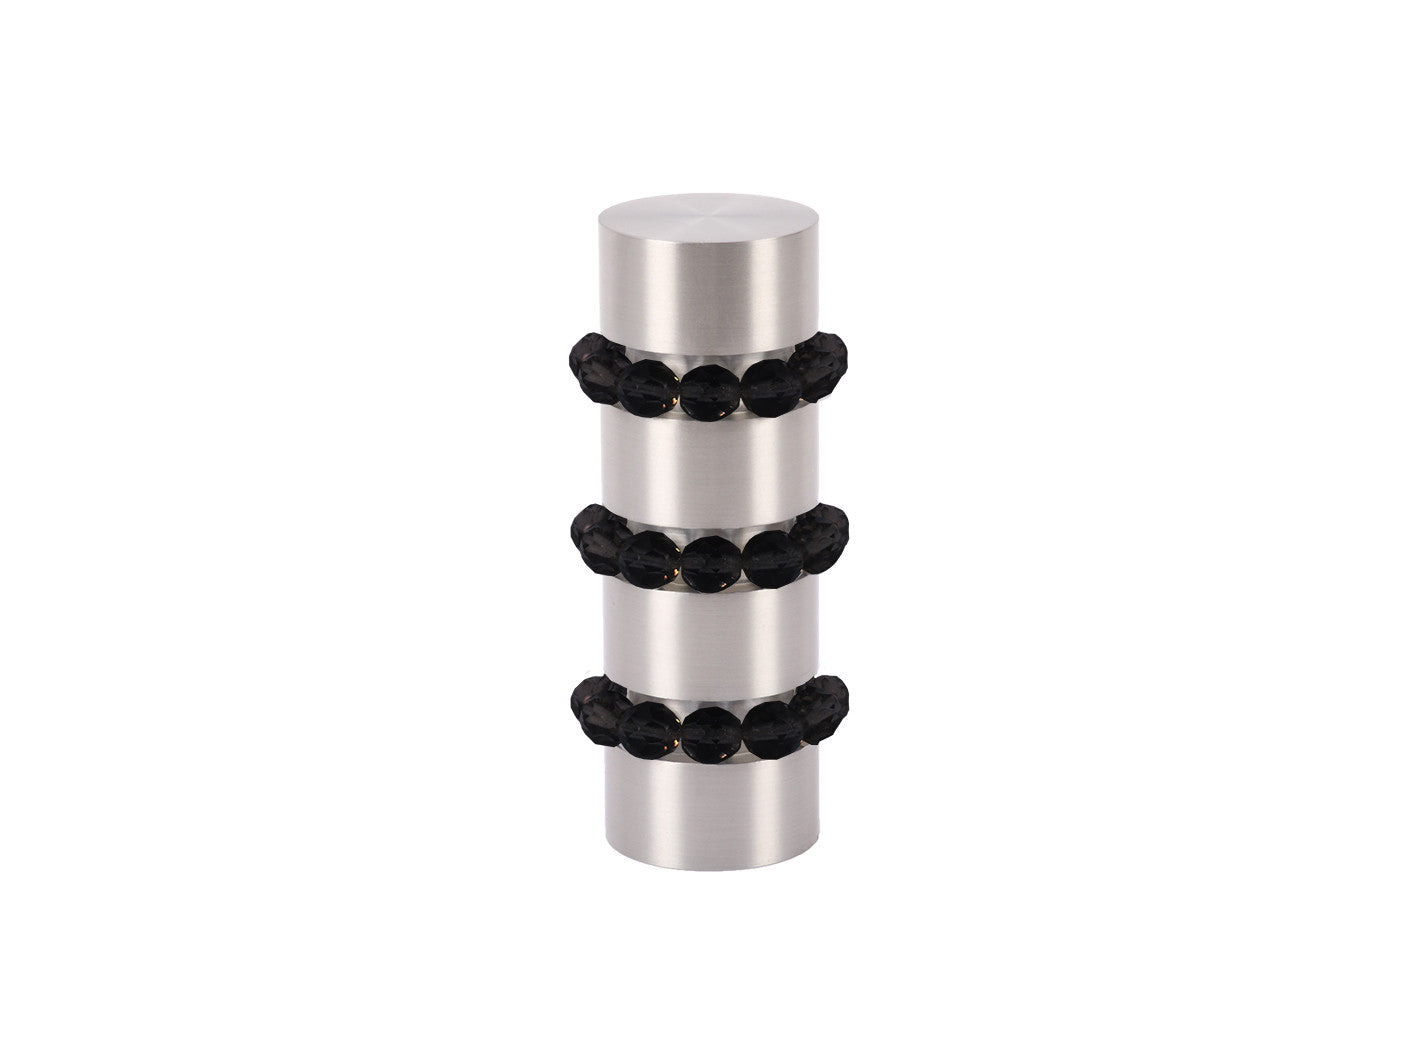 Beaded stainless steel curtain pole finial in jet black glass | Walcot House 19mm collection